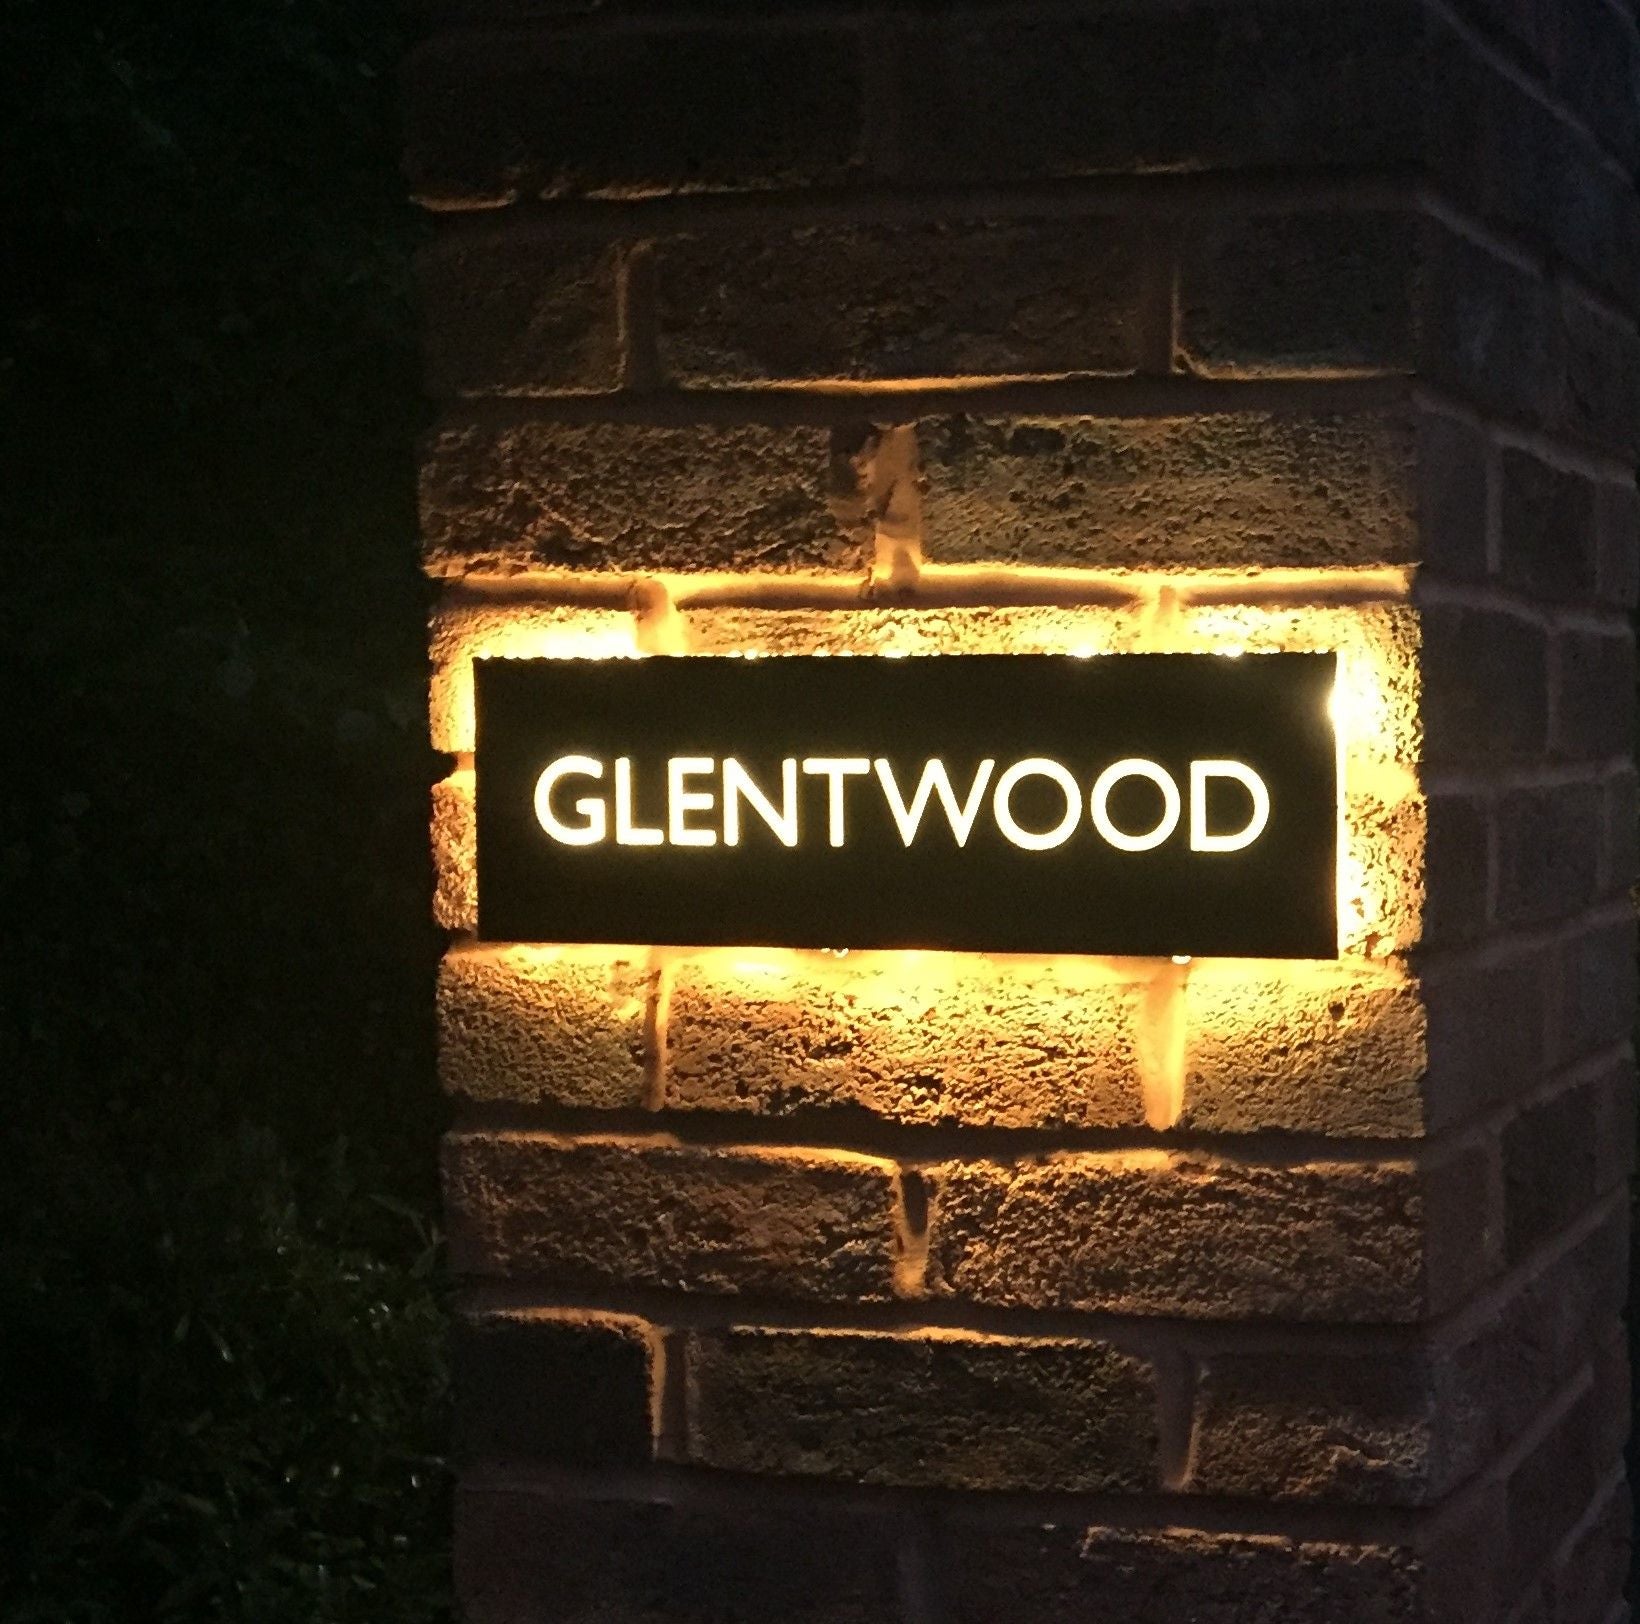 LED House Name, LED House Sign, LED Sign, Light up Sign, LED House Sgin, Warm wHite LED House Sign, Bespoke House Sign, House Name in Stainless Steel, Stainless Steel LED Sign, Sign for unlit areas, House Name, Custom Made House Name